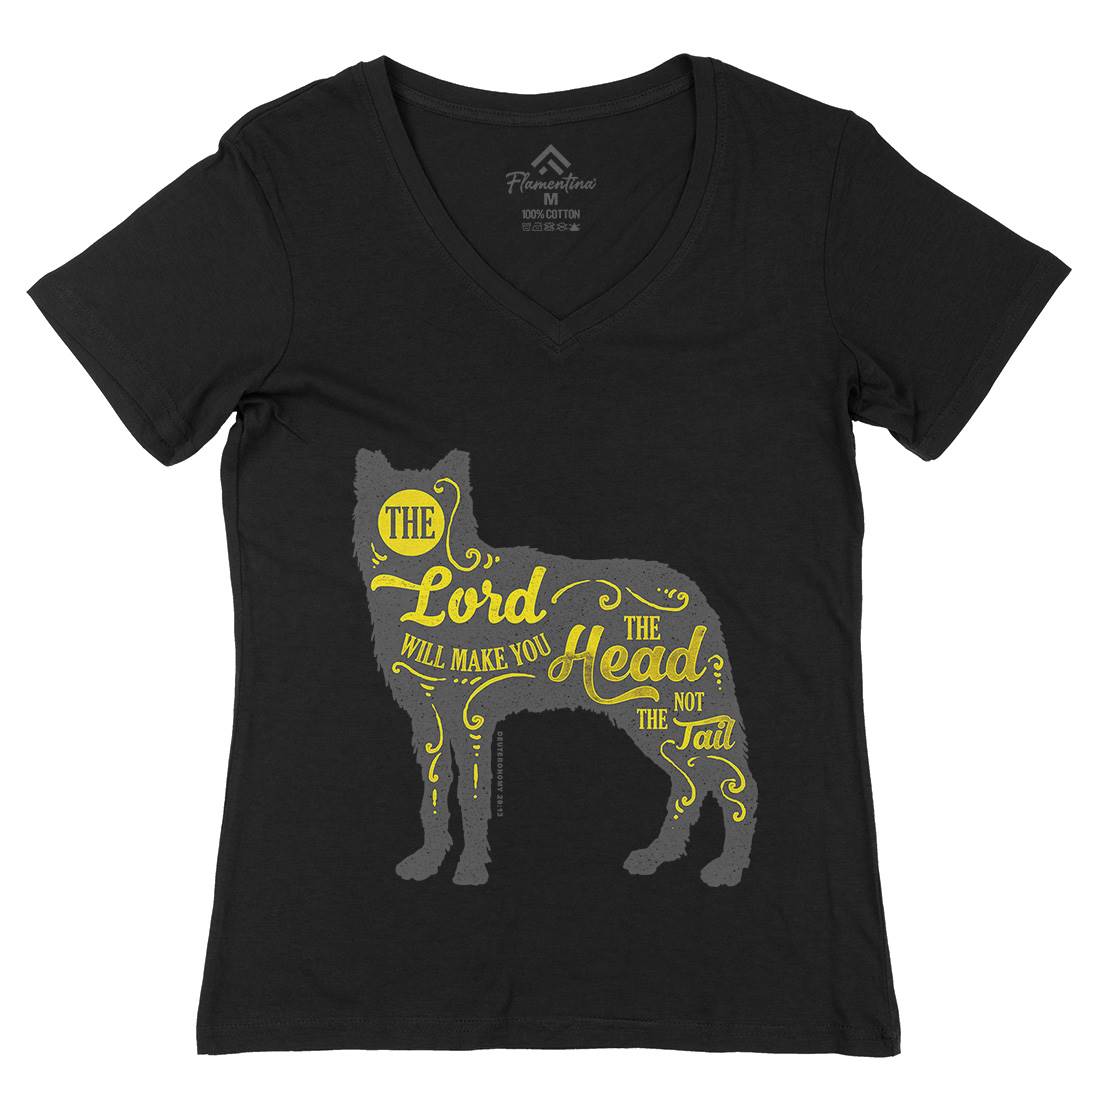 Head Not The Tail Womens Organic V-Neck T-Shirt Religion A326